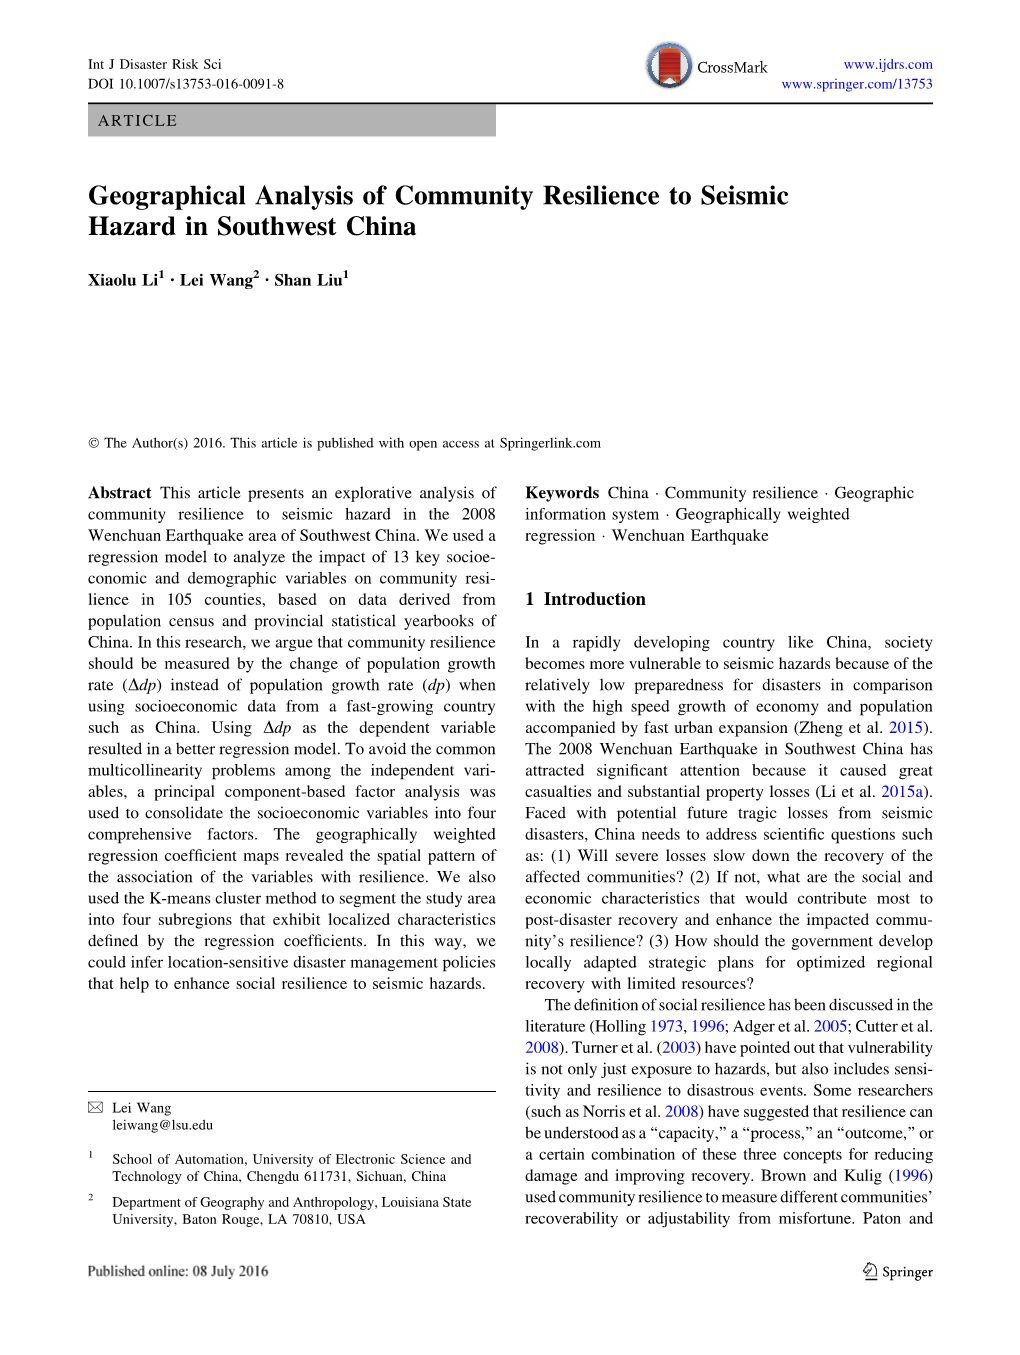 Geographical Analysis of Community Resilience to Seismic Hazard in Southwest China